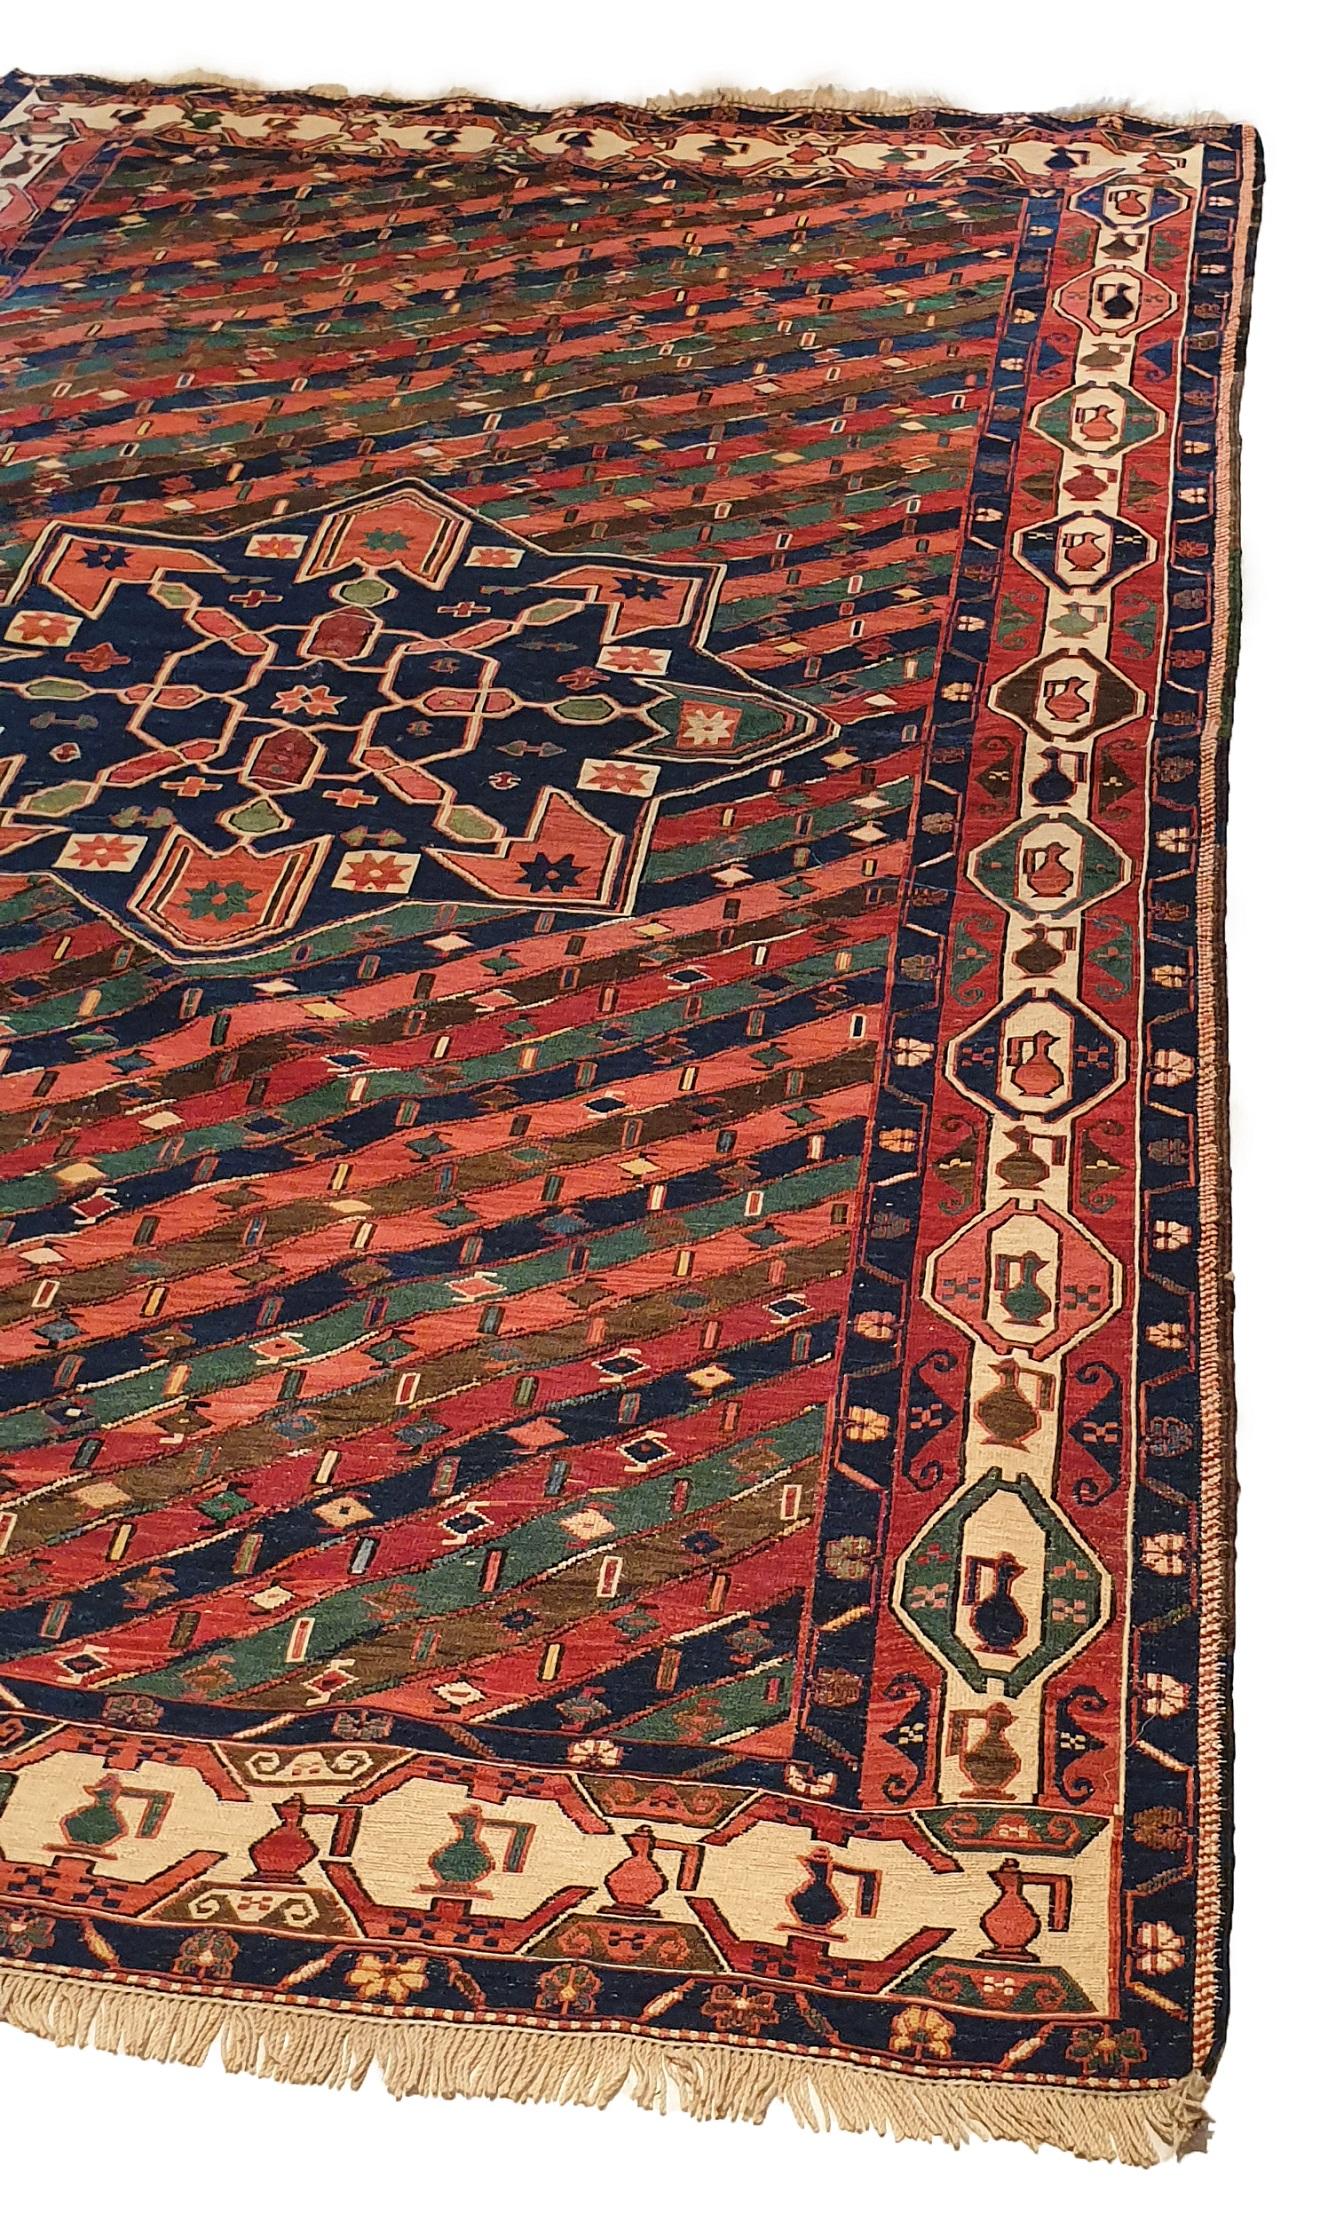 751 - Nice 20th century Kilim from Azerbaijan with beautiful pattern, and beautiful colors pink, orange, yellow, green and dark brown, entirely hand-woven with wool woven on cotton foundation.